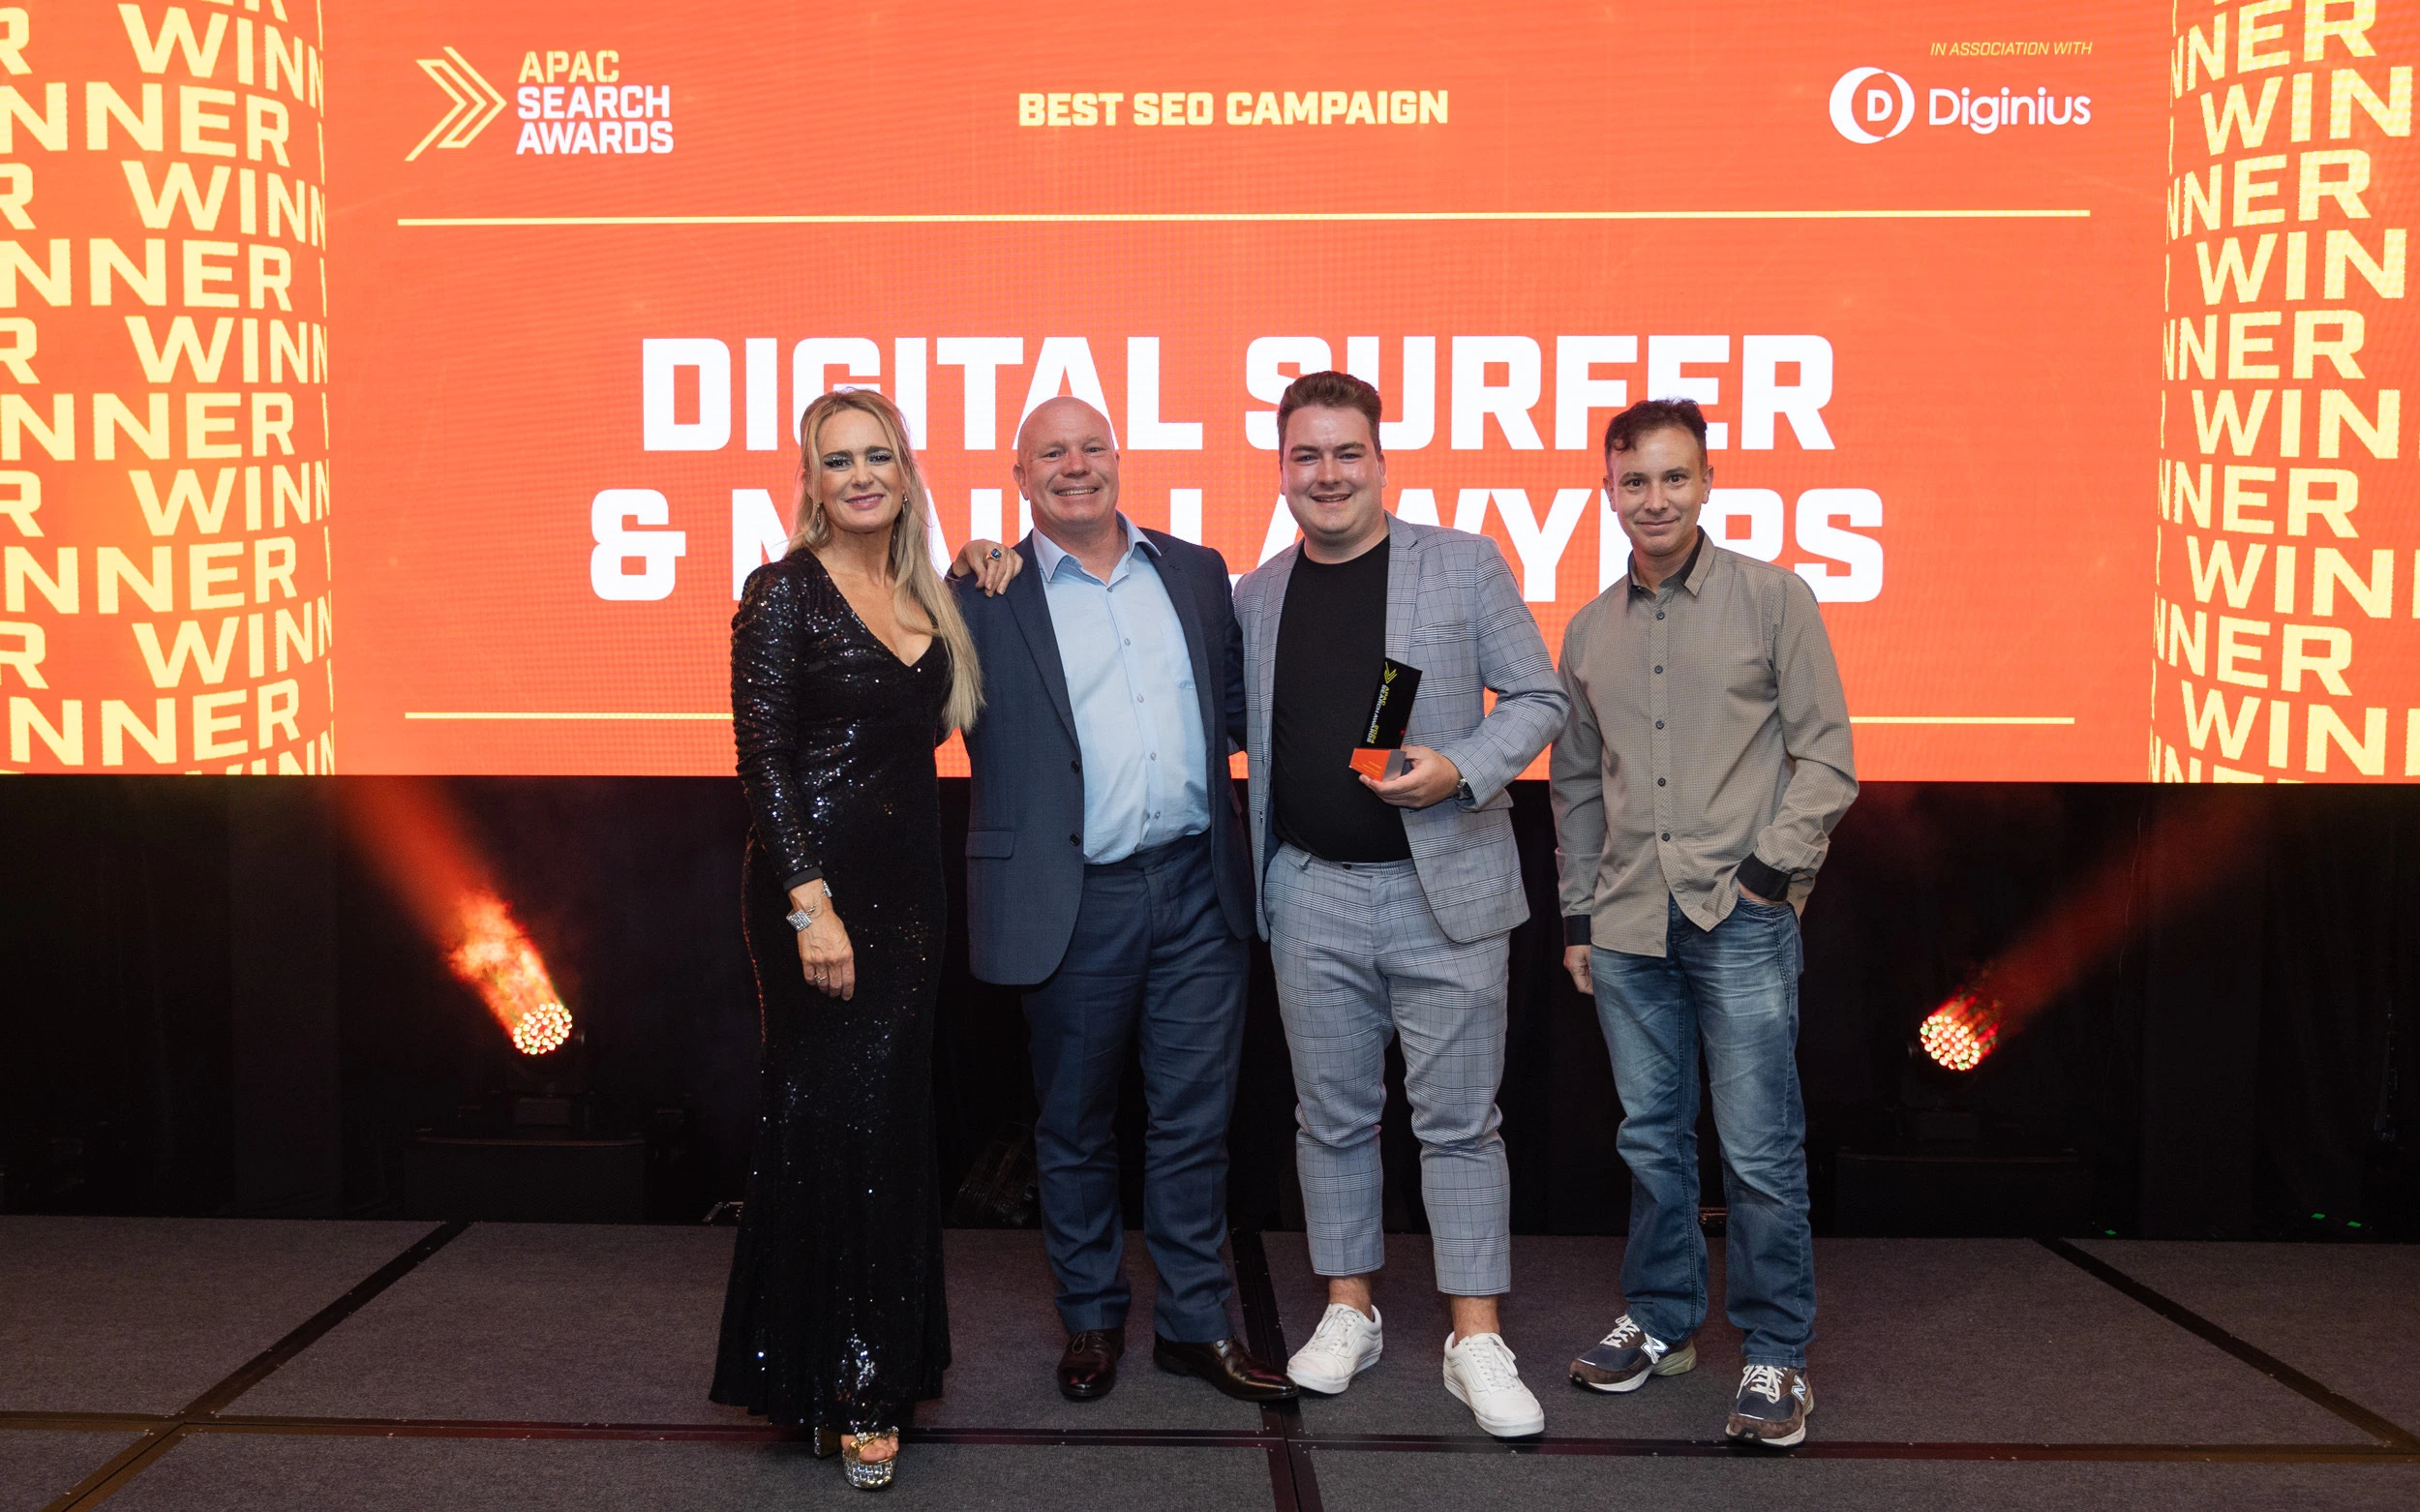 APAC Awards Best SEO Campaign